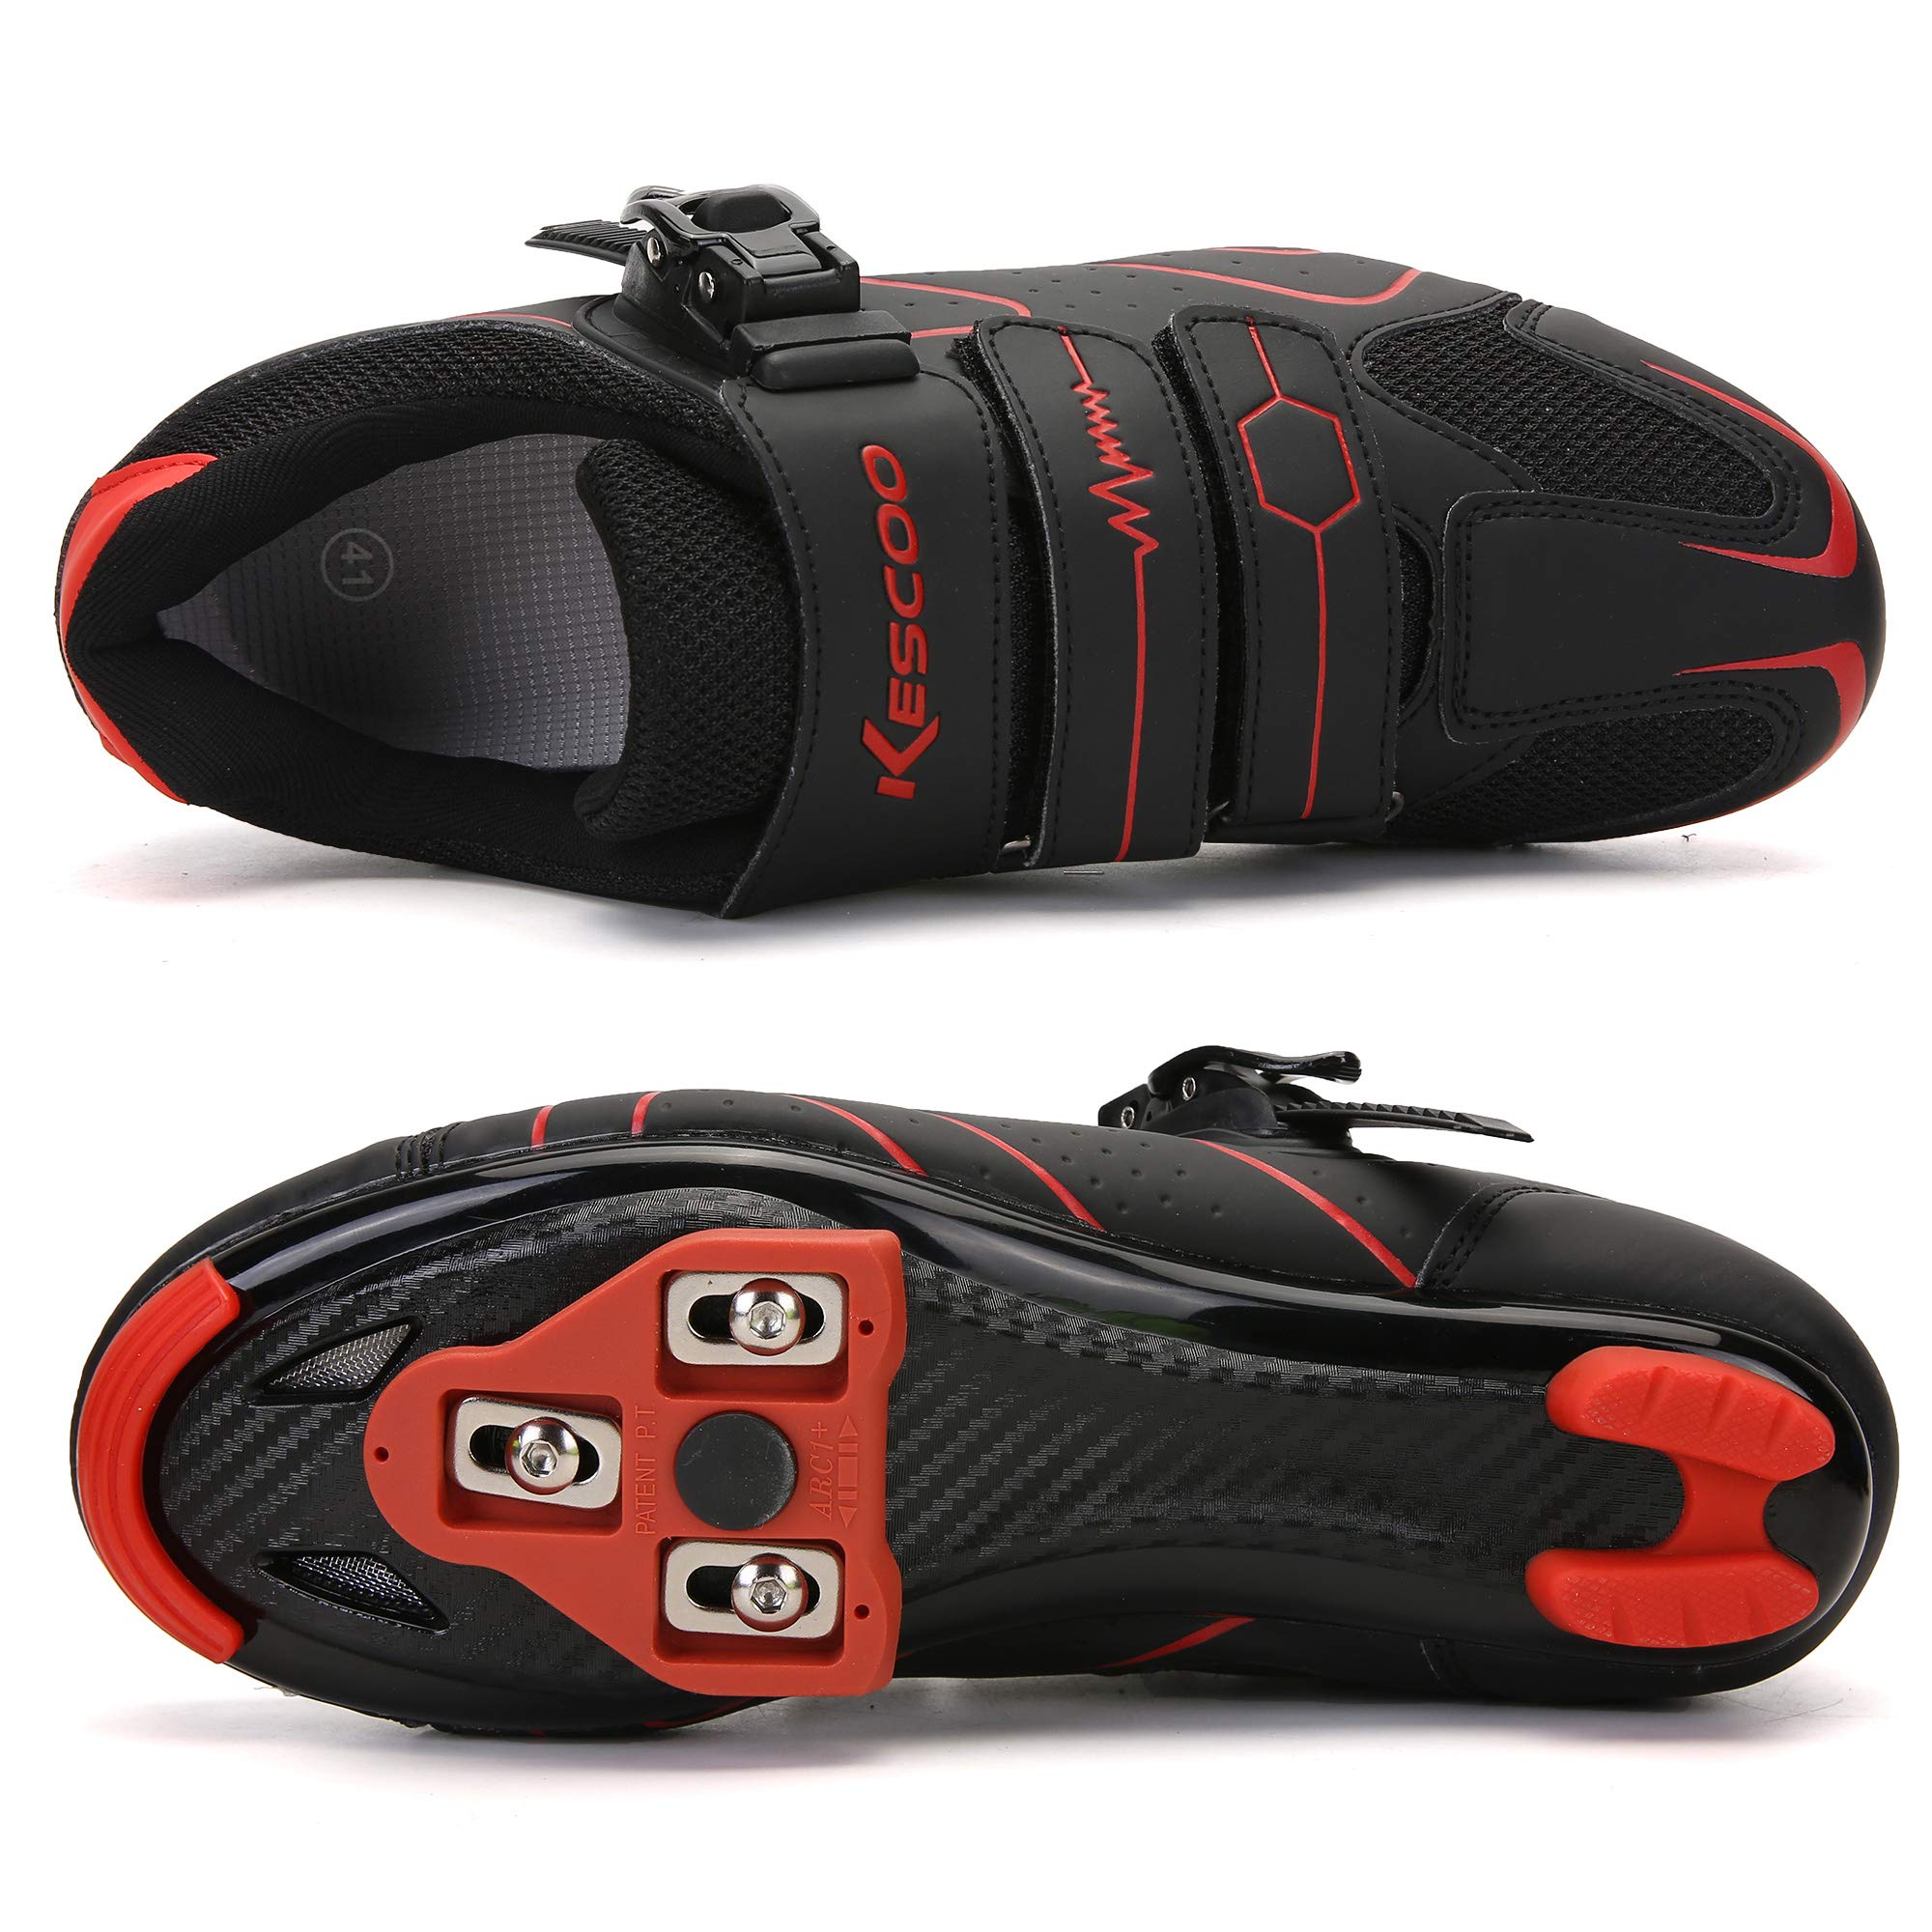 Unisex Cycling Shoes Compatible with pelaton Indoor Road Bike Shoes Riding Shoes for Men and Women Delta Cleats Clip Outdoor Pedal (Black-red, M13)